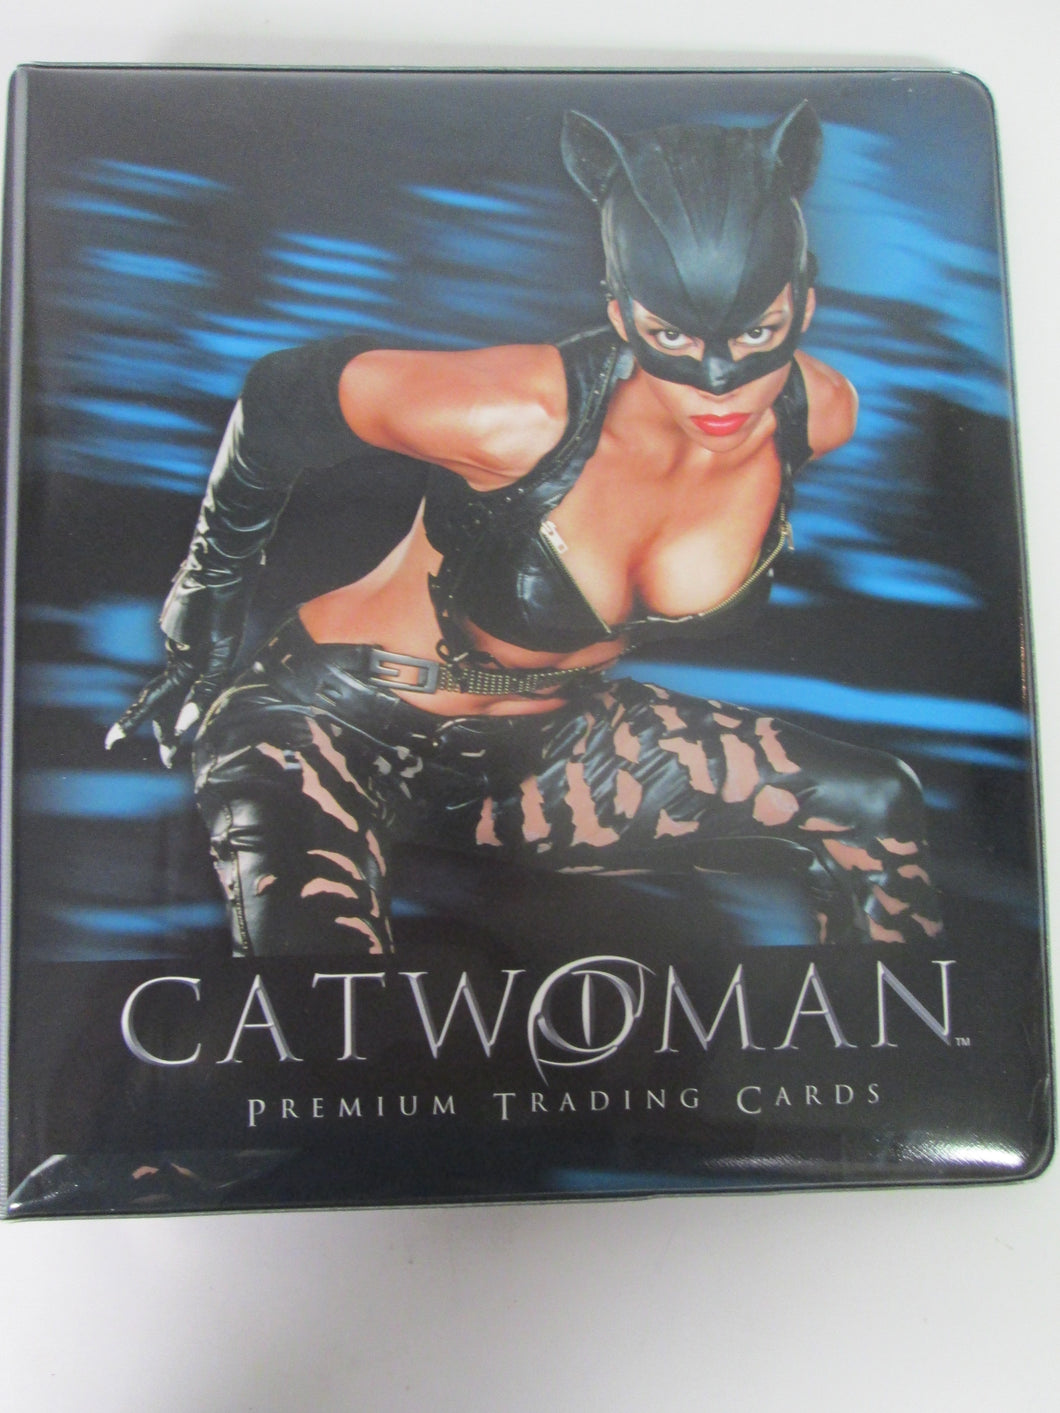 Catwoman Premium Trading Cards Binder Halle Berry Cover